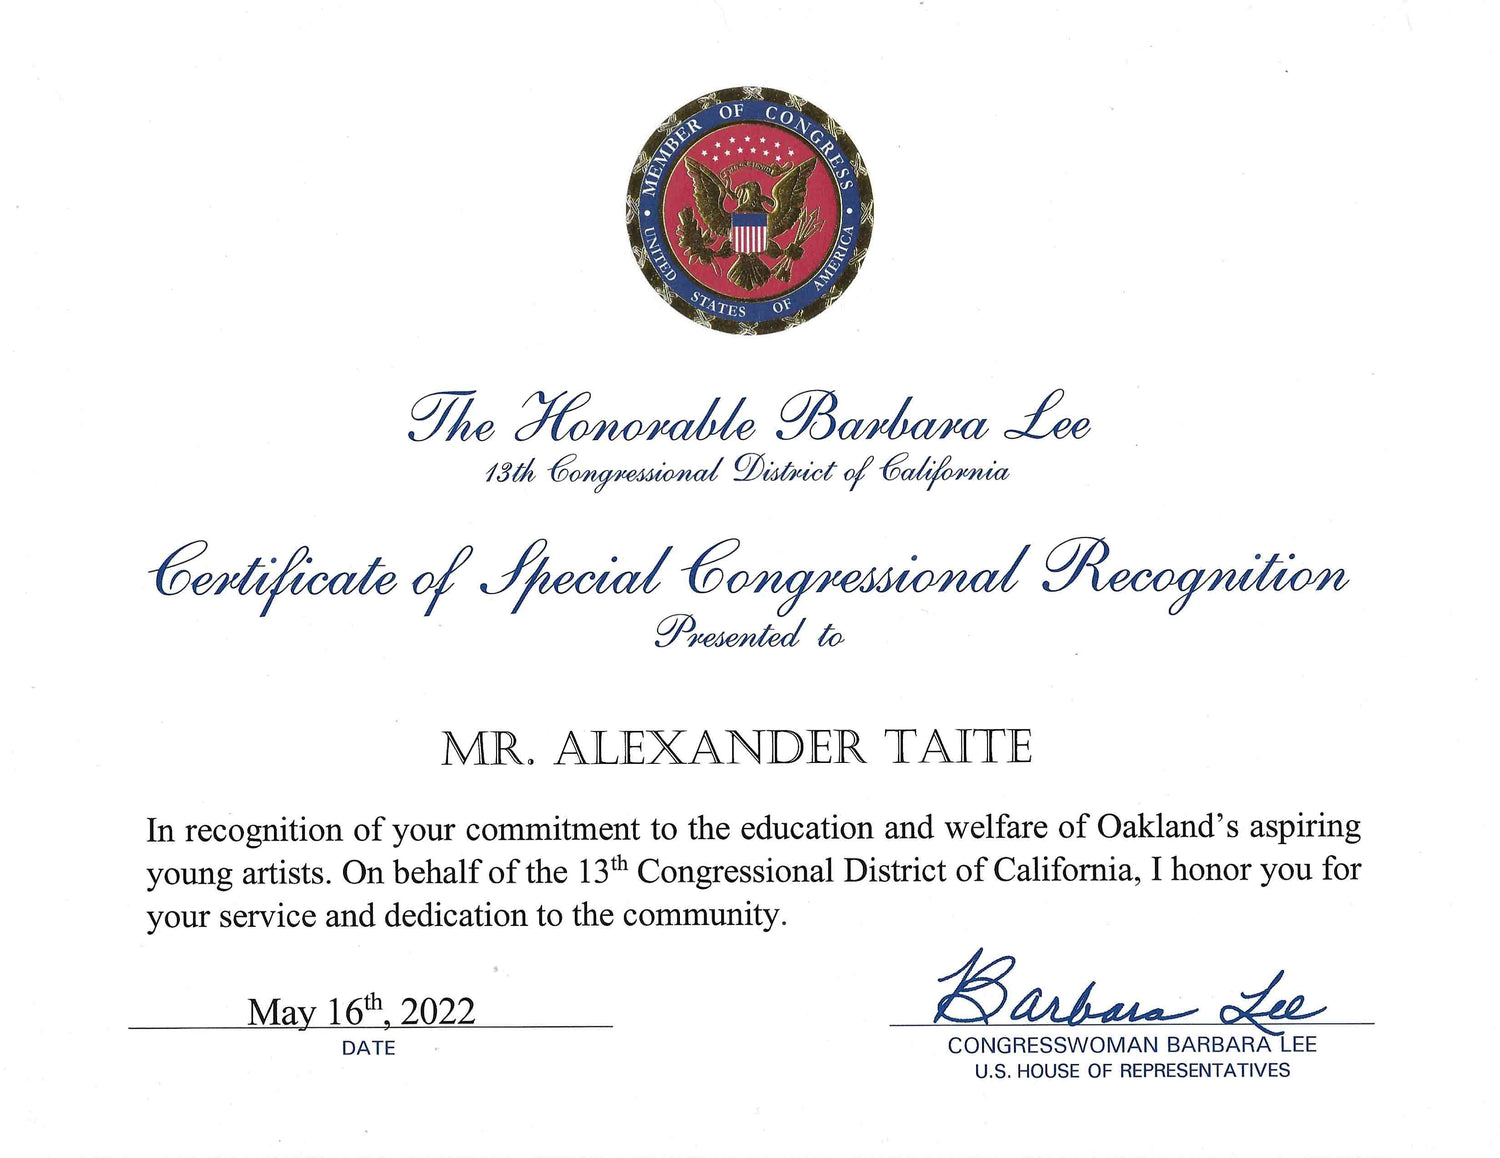 Alex was recognized for his  commitment to the education and welfare of Oakland's aspiring young artists. The certificate was presented by Barbara Lee, Congresswoman, House of Representatives.